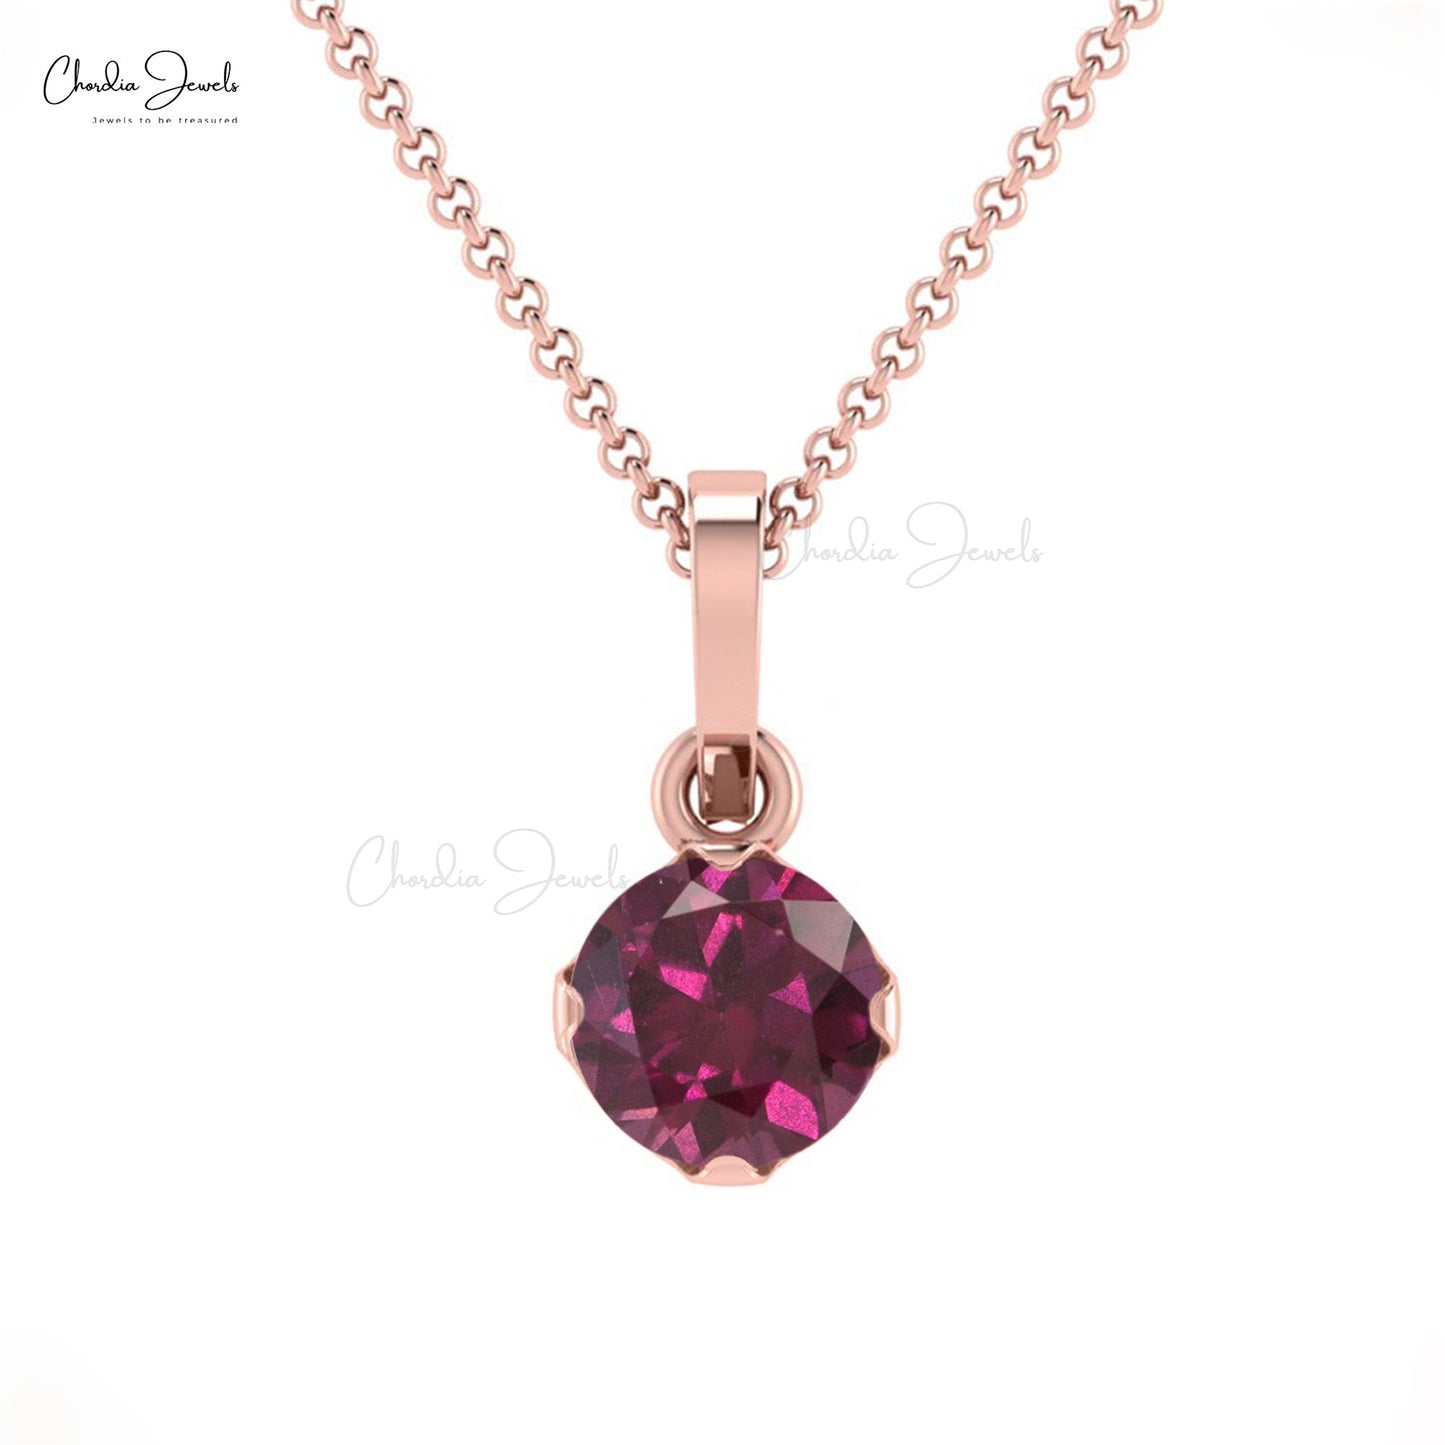 Load image into Gallery viewer, 4mm Natural Solitaire Rhodolite Garnet Pendant
